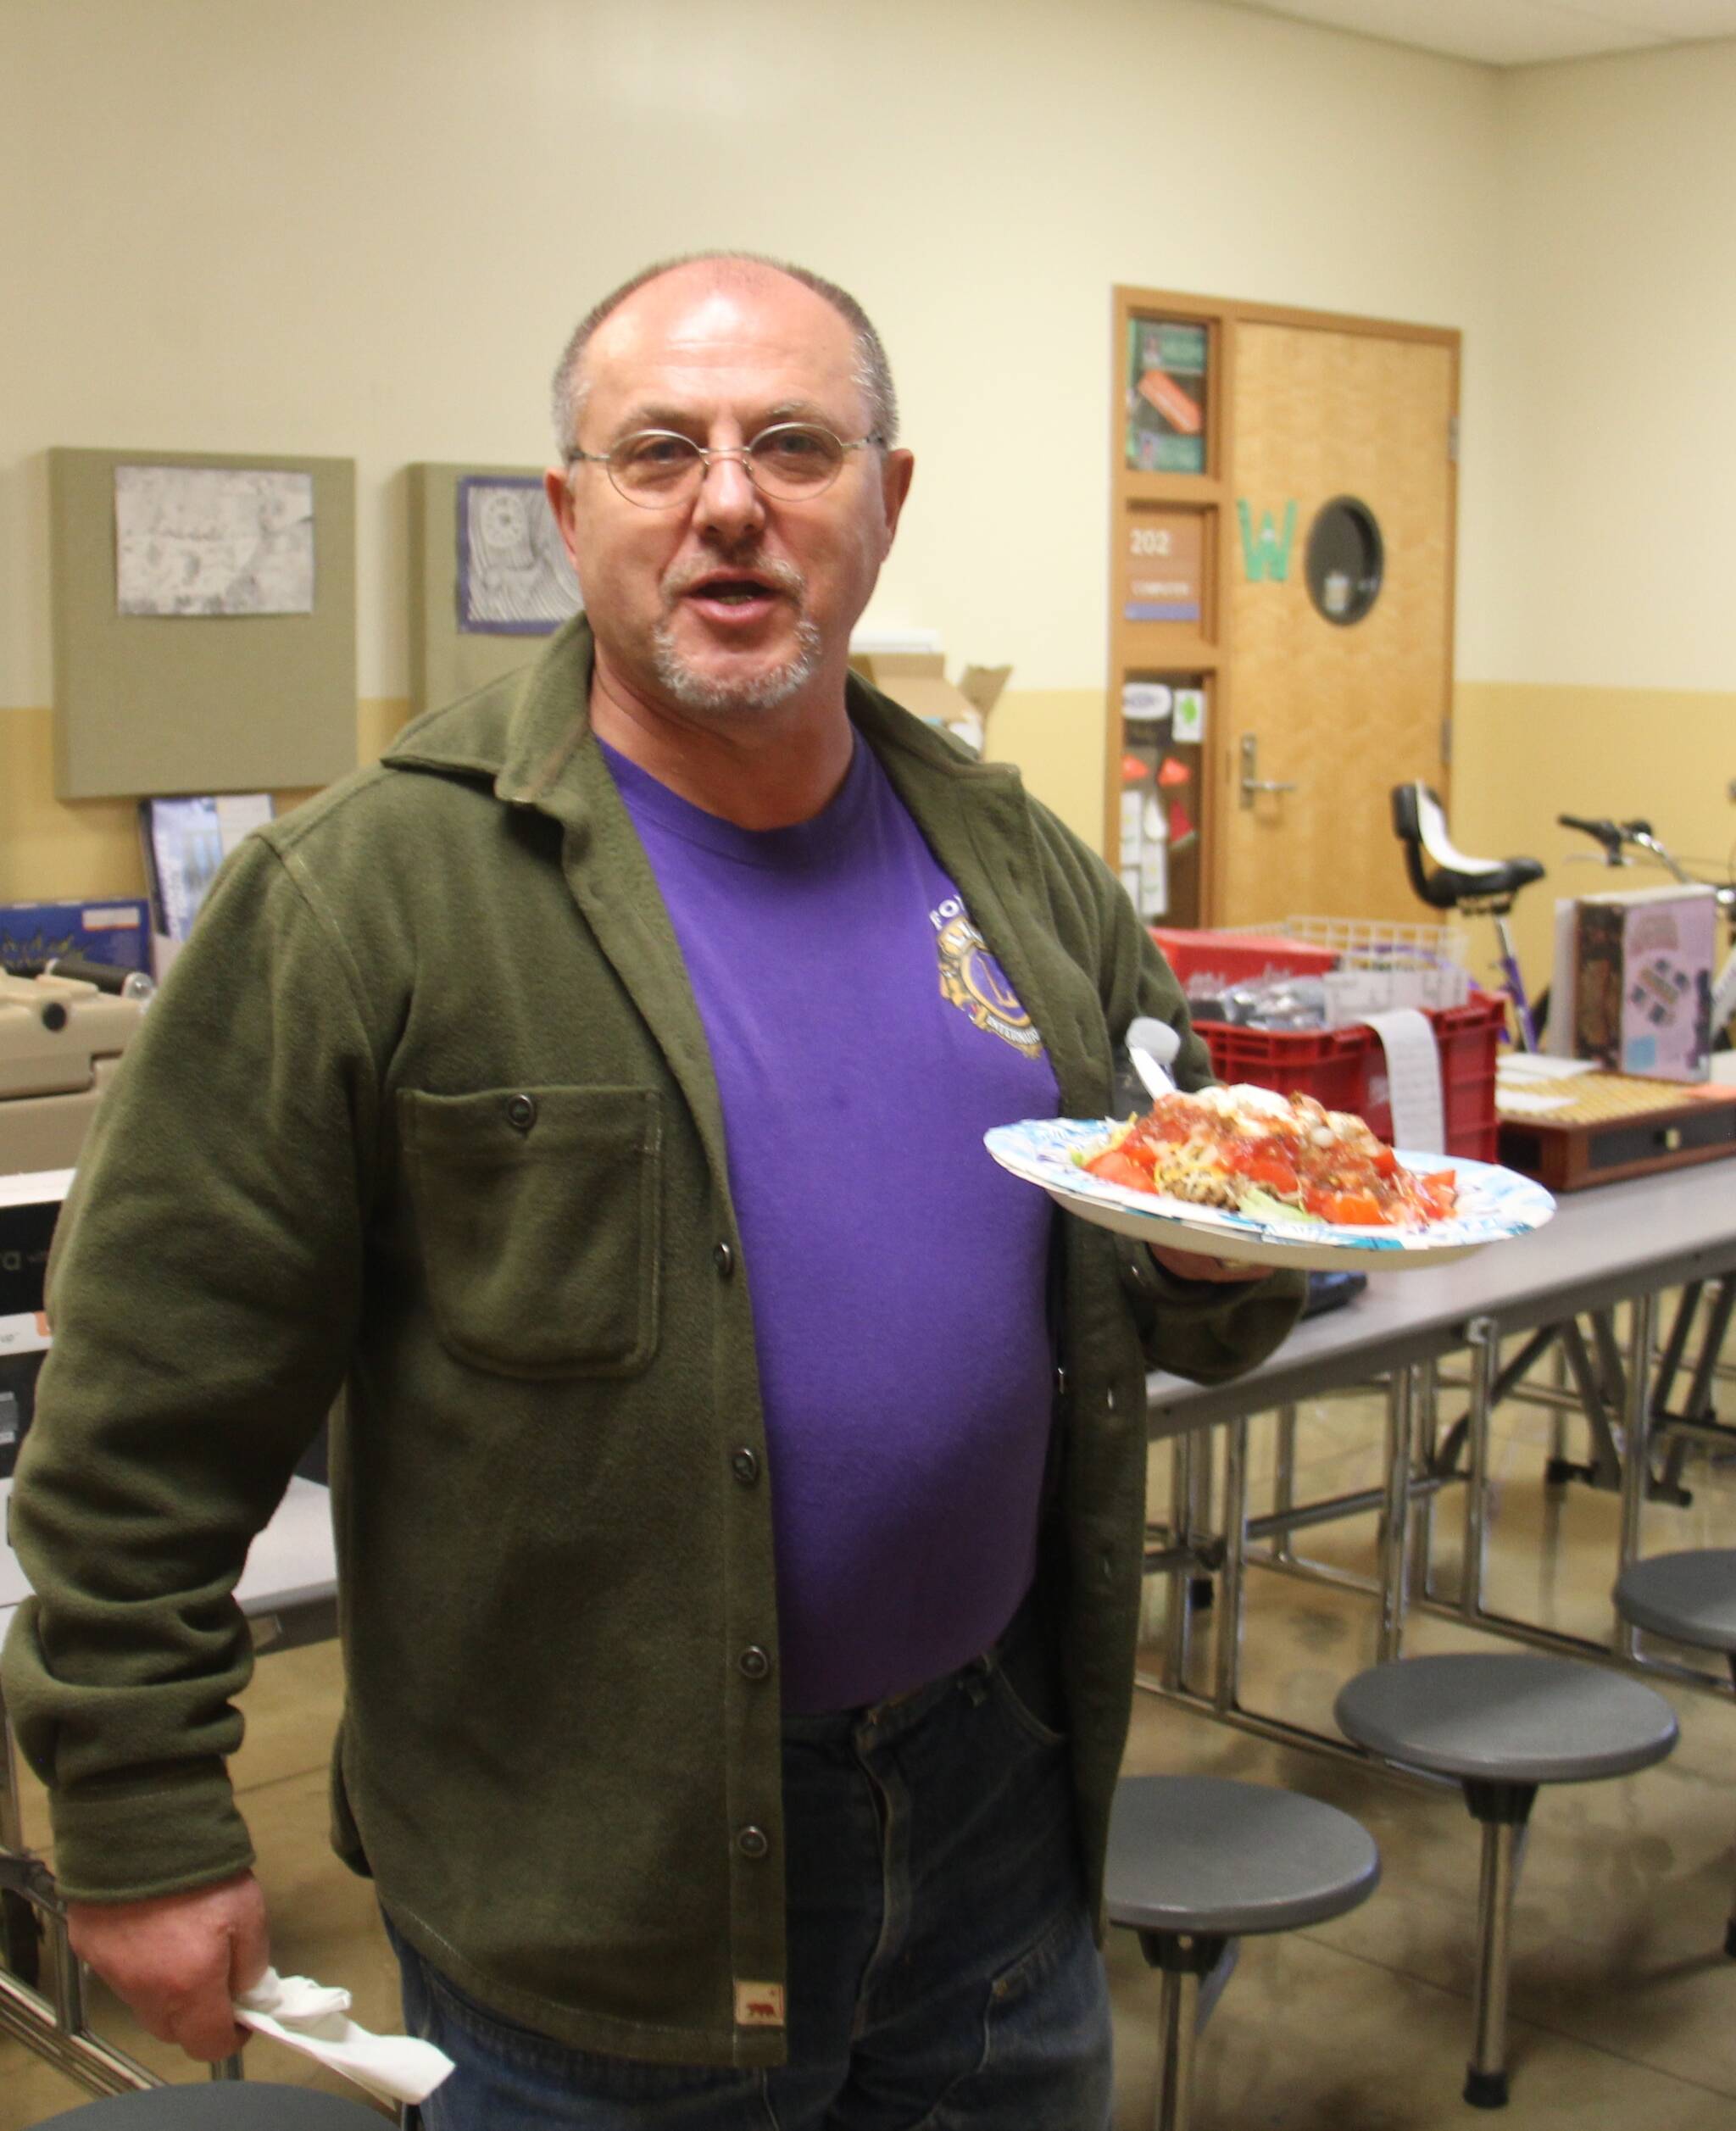 Giancarlo Buonpane was keeping his strength up to bid more with a delicious plate of food from the senior parent concessions stand. Photo Christi Baron